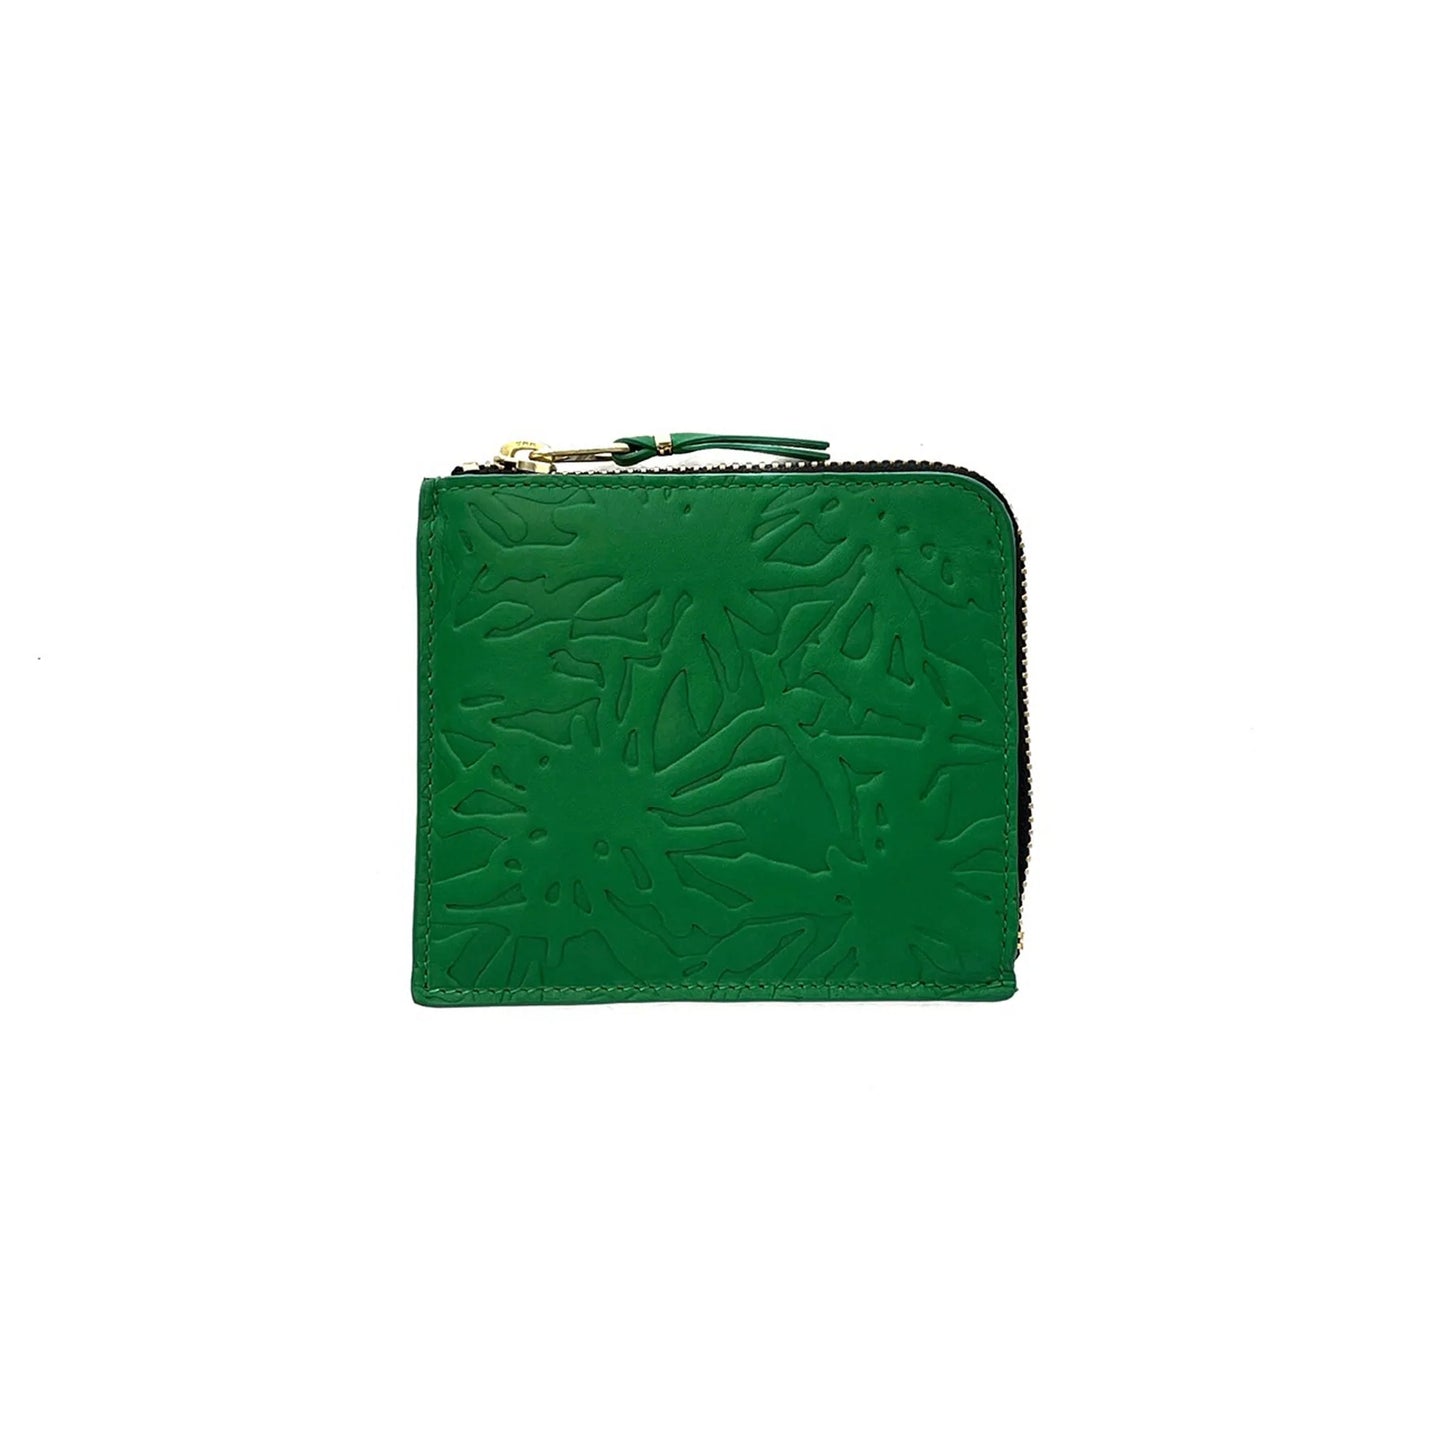 Embossed forest leather wallet in green